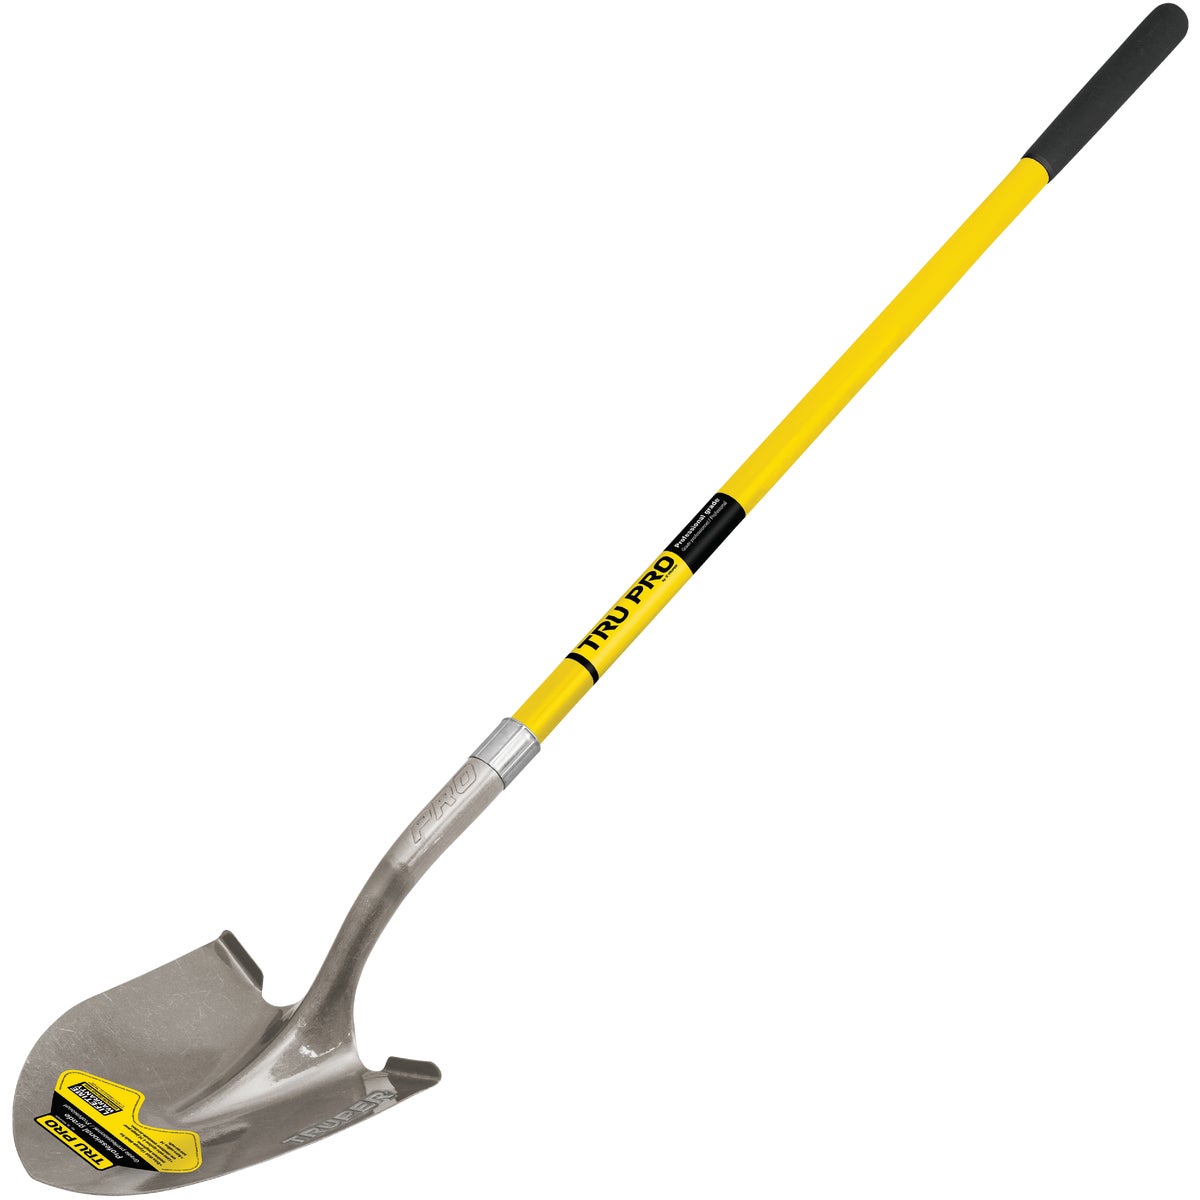 Item 757595, Tru Pro long handle round point shovel with extended step. 48 In.